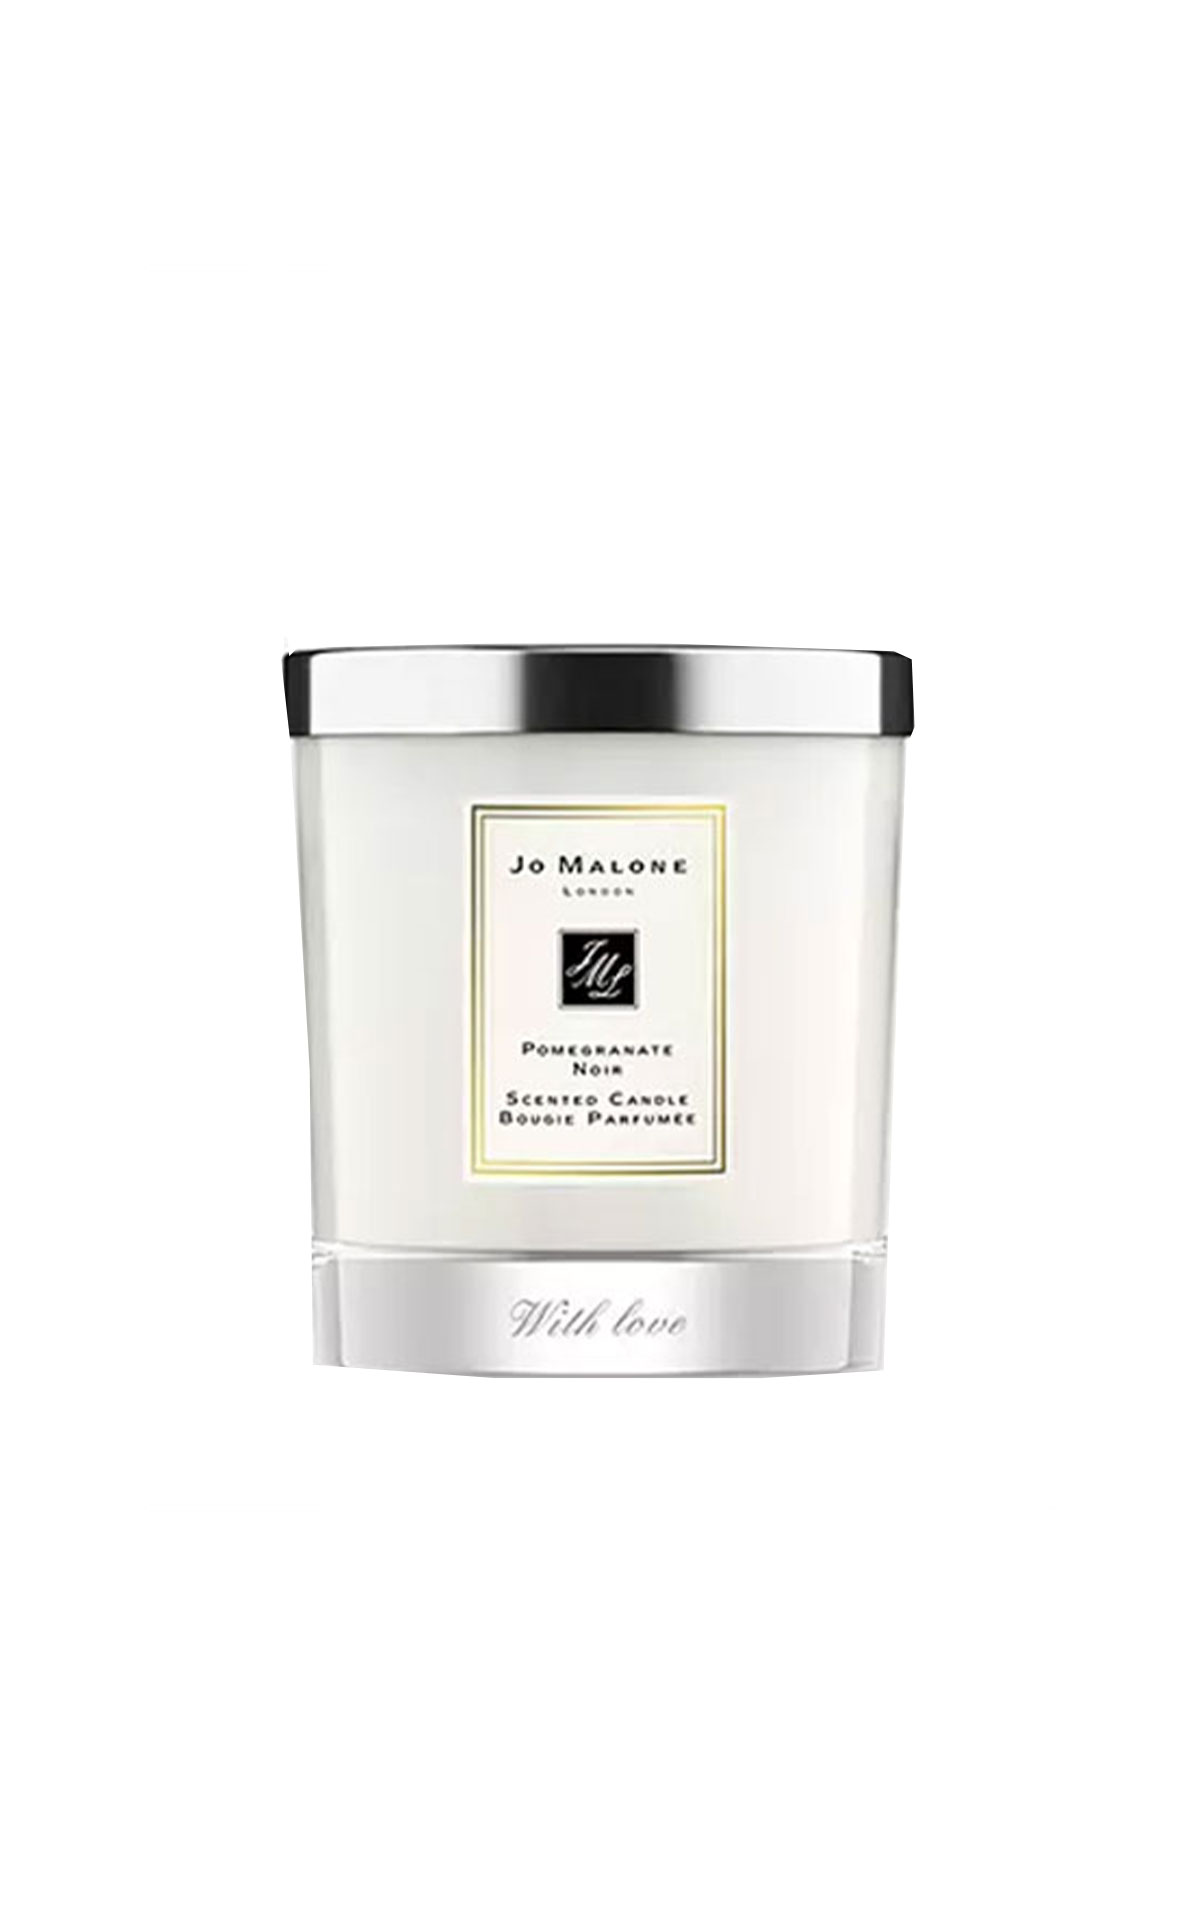 Jo Malone London Pomegranate noir candle from Bicester Village